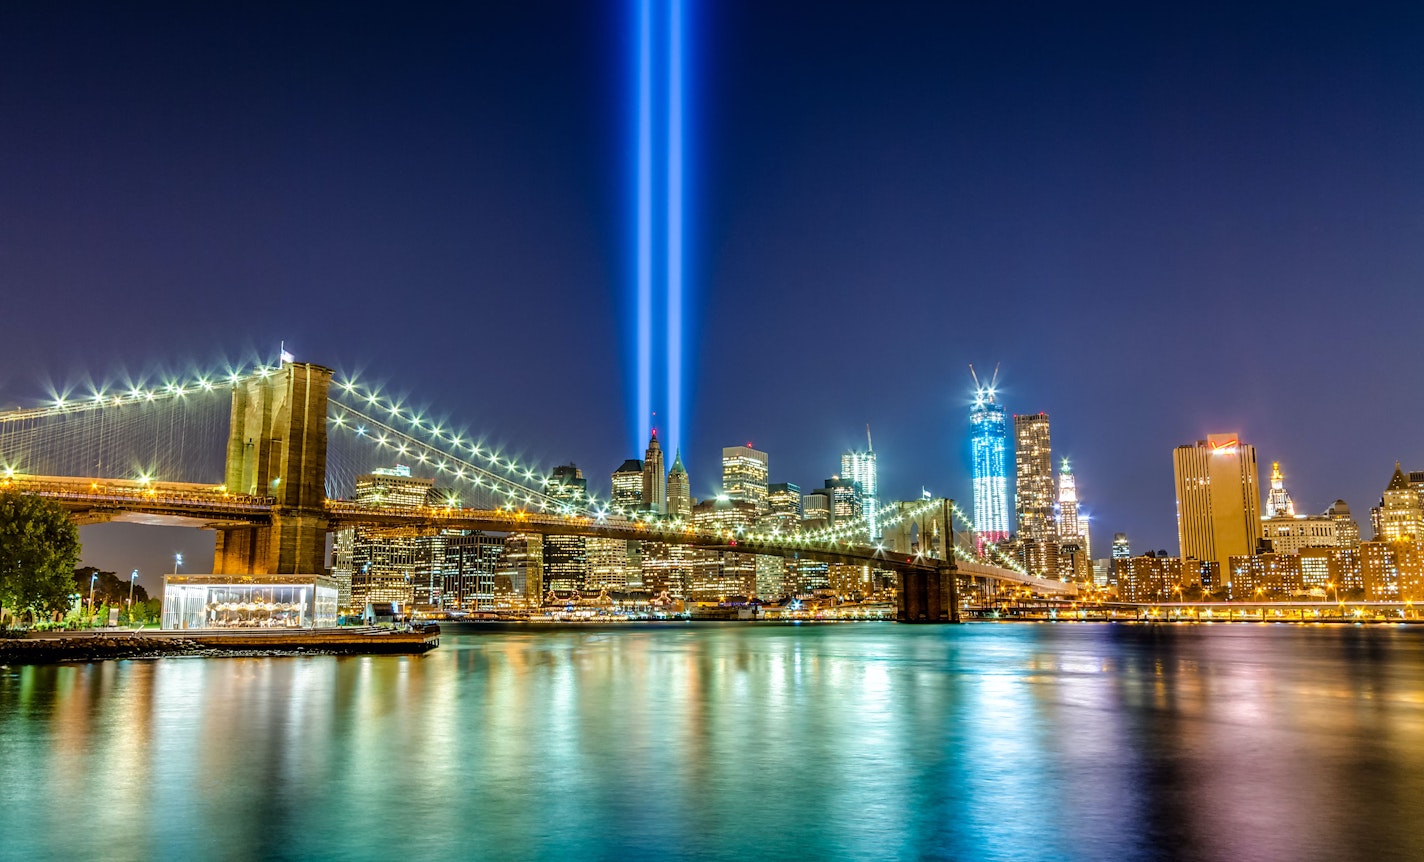 Remembering 9/11: A Life Story Workshop